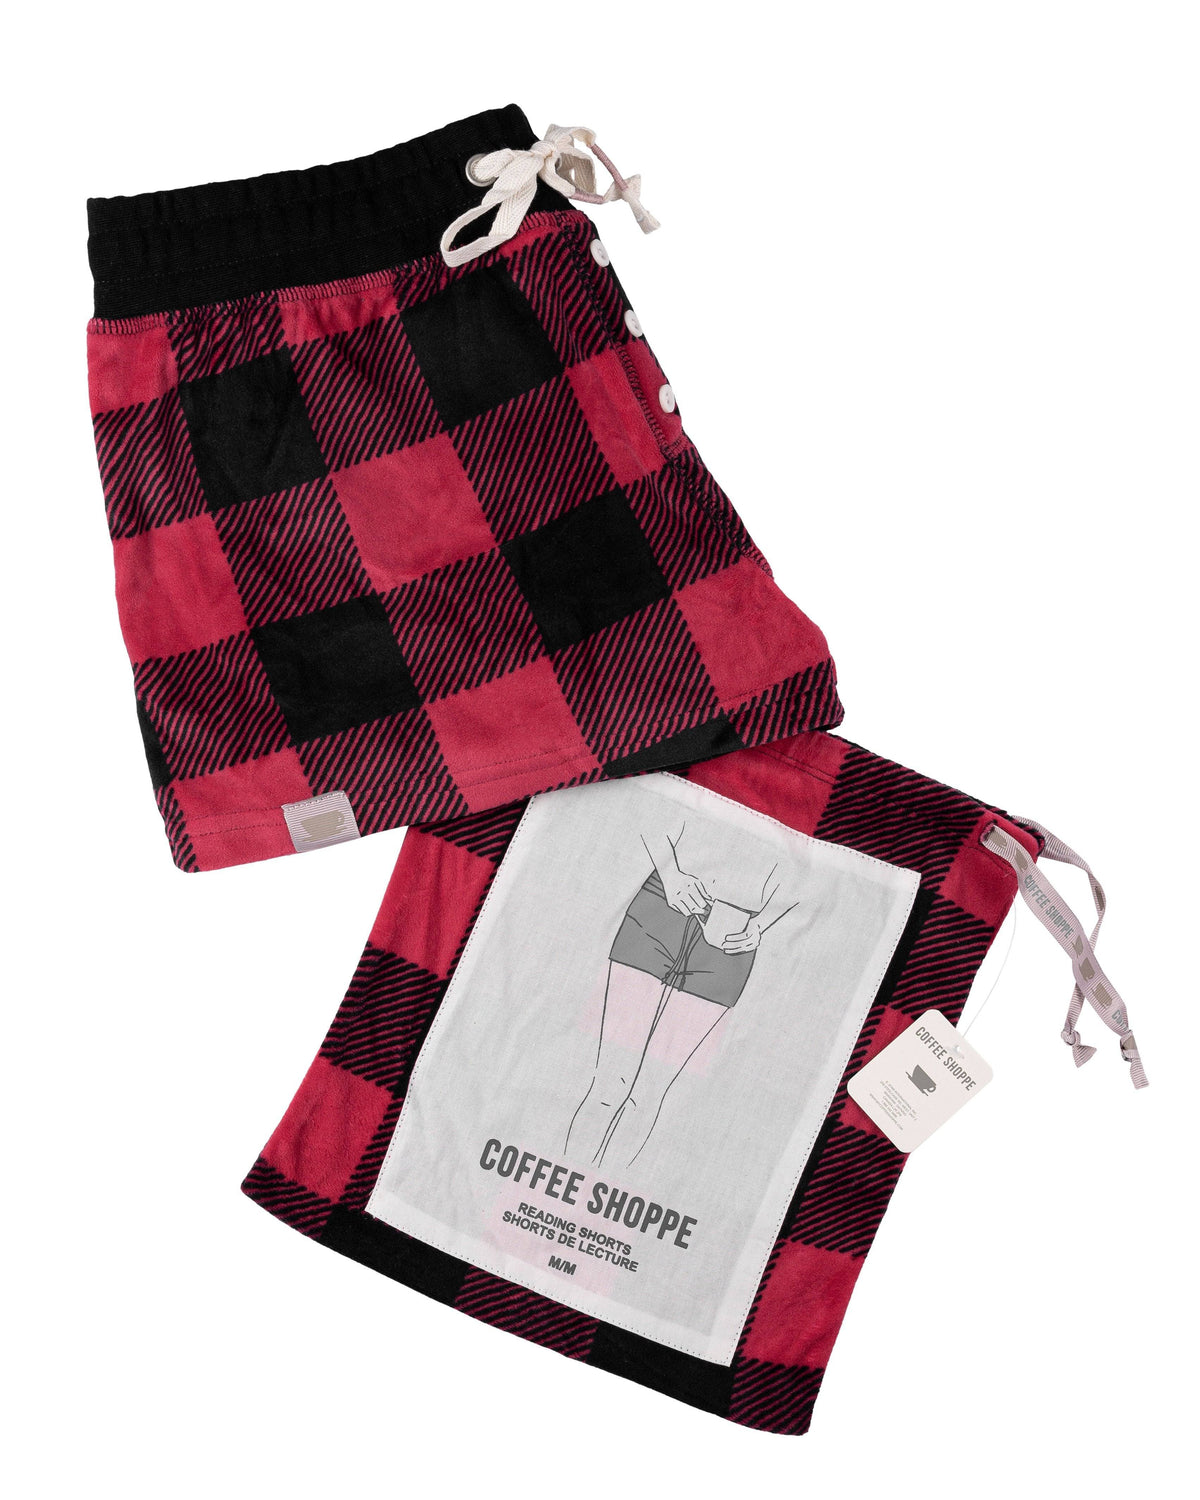 Stay-At-Home Lounge Short - Deep Red Buffalo Plaid - LATTELOVE Co.